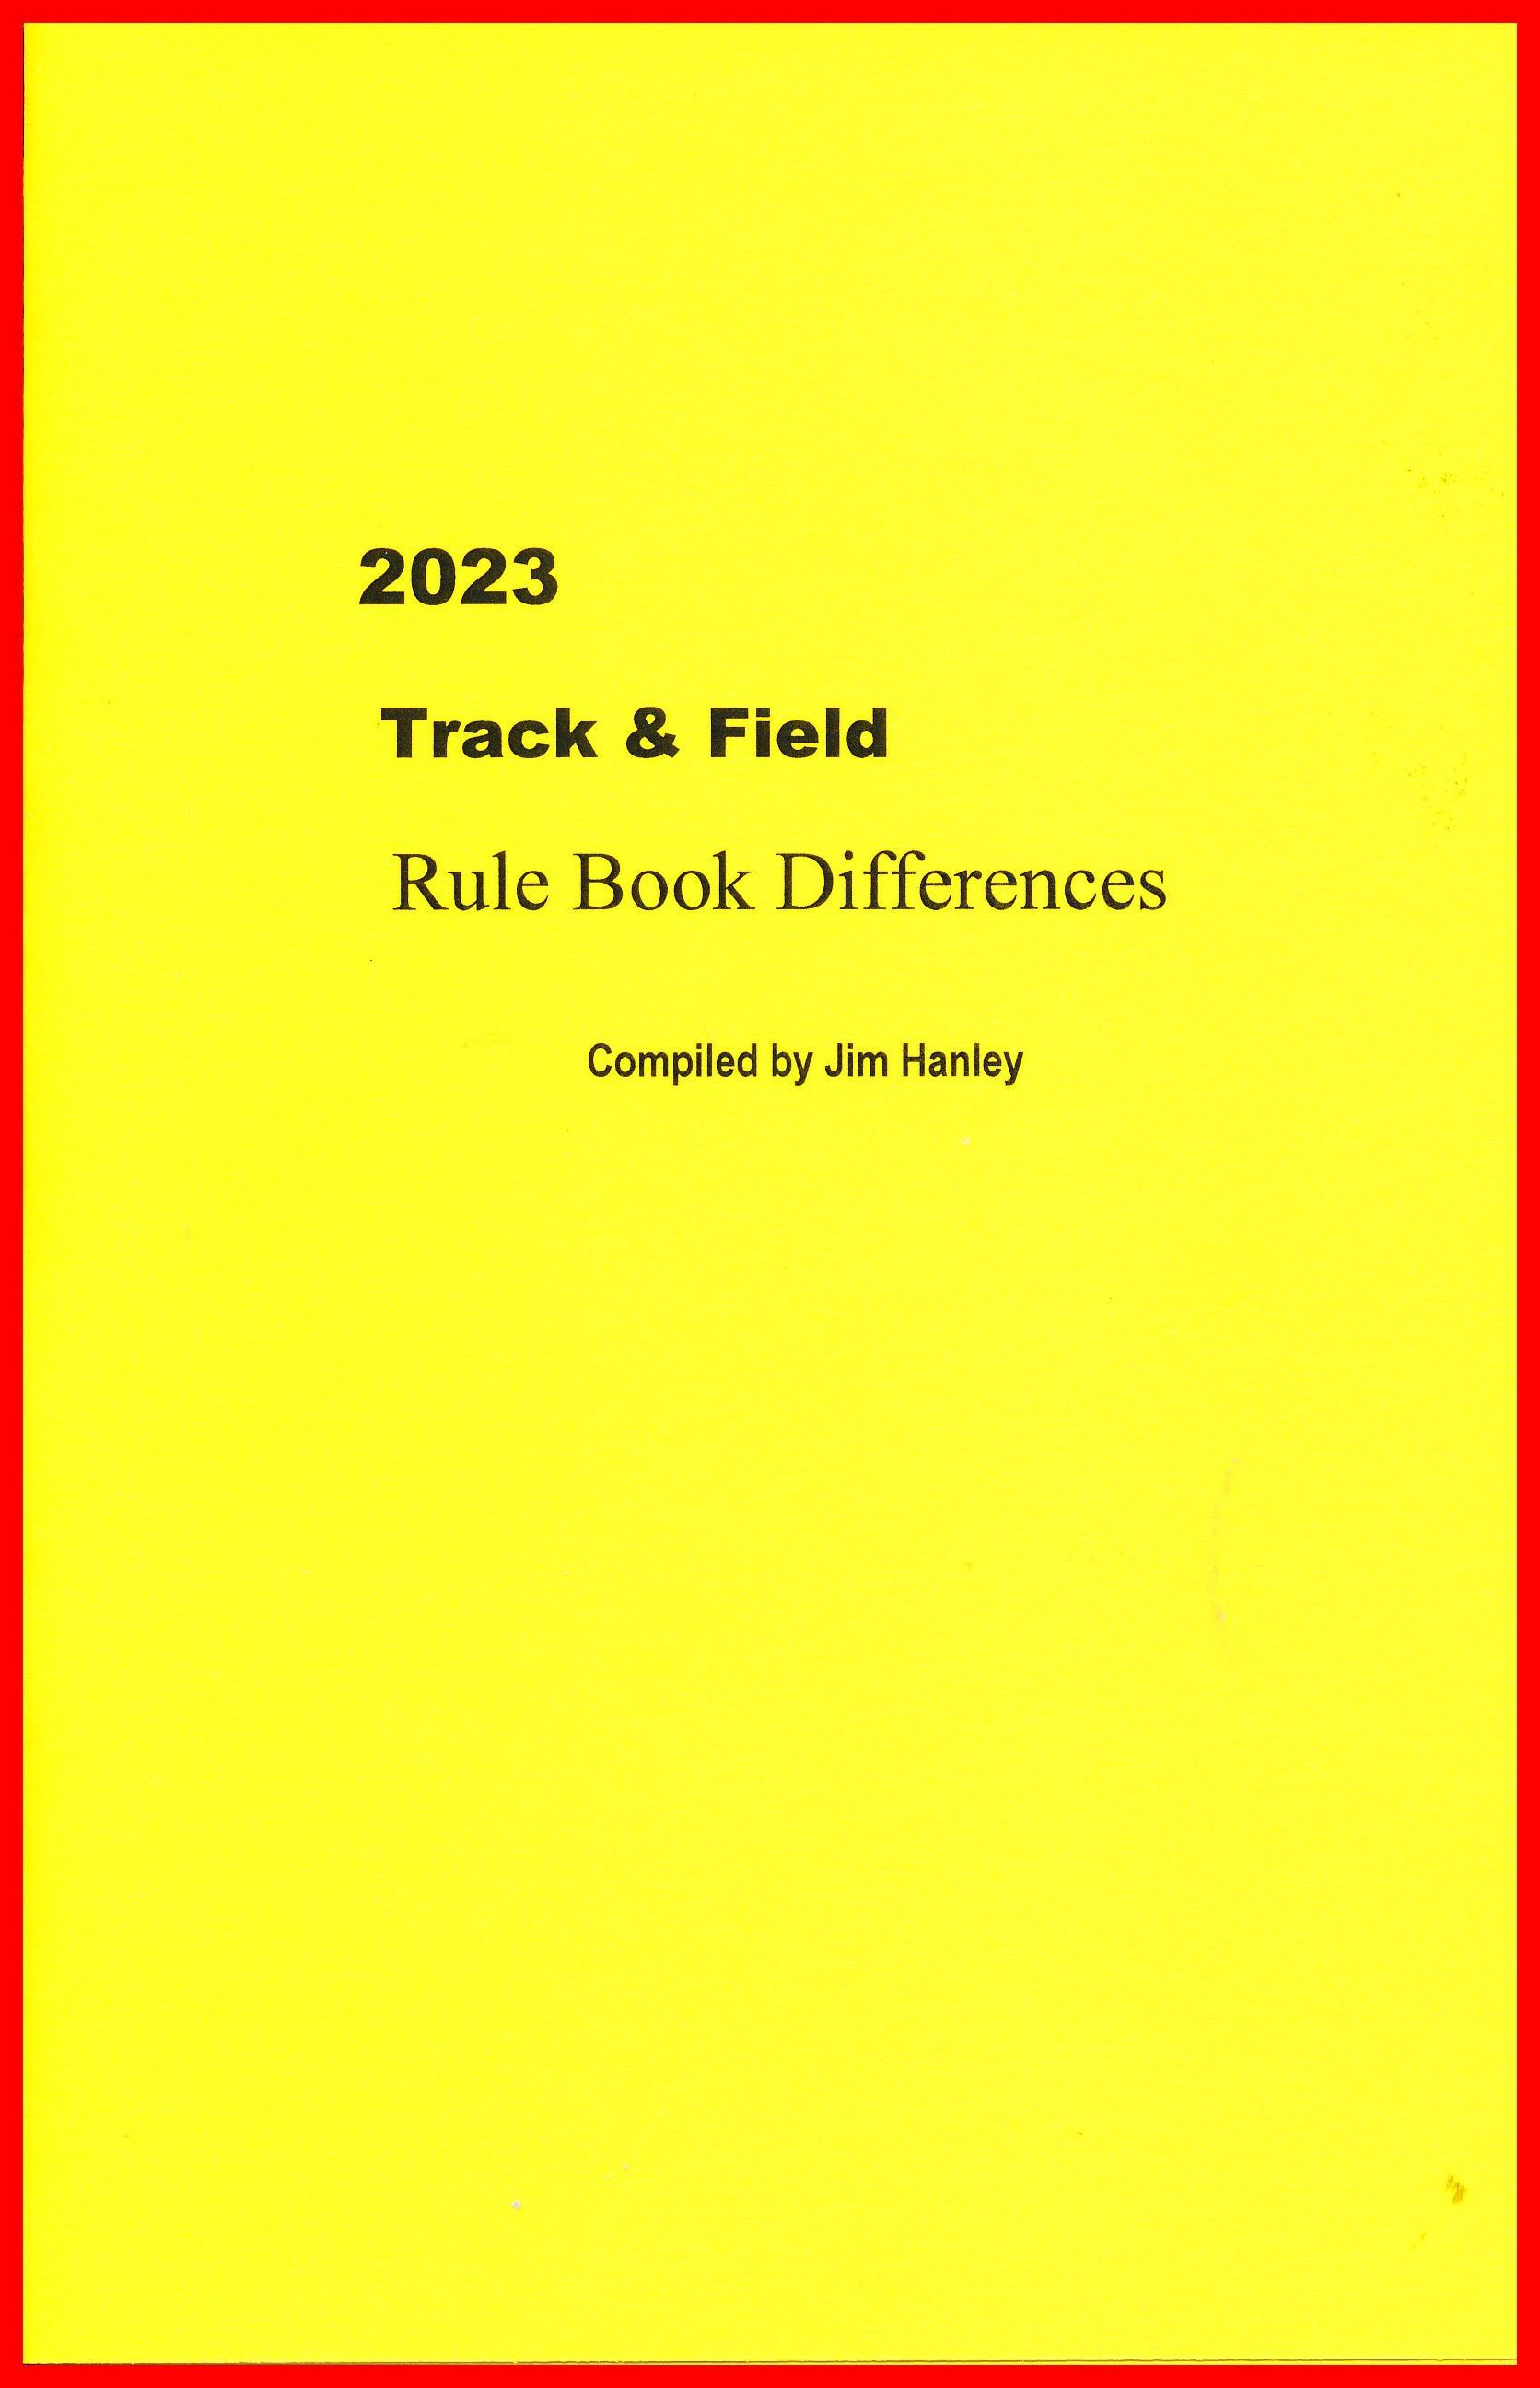 Track & Field Rule Book Differences